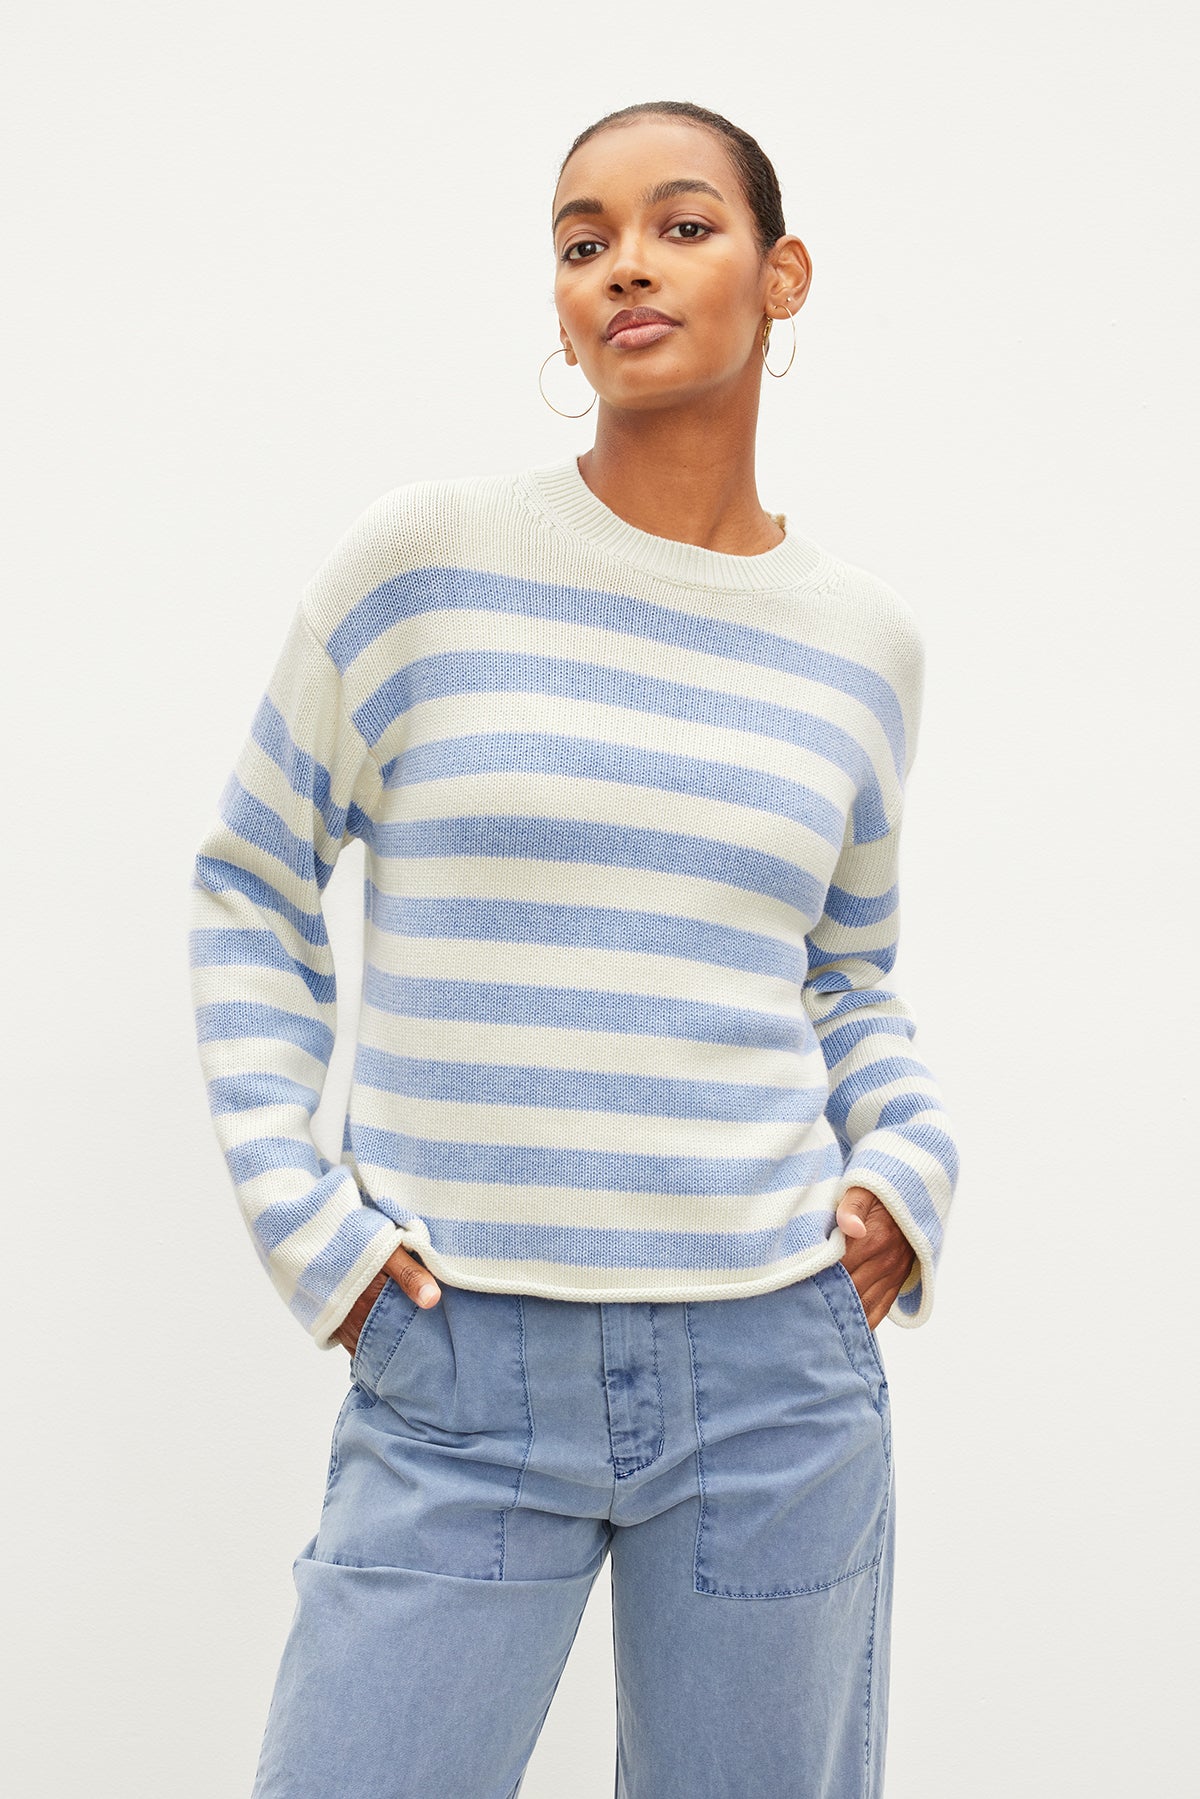 The modern model is wearing a blue and white striped LEX STRIPED CREW NECK SWEATER by Velvet by Graham & Spencer.-35967621660865